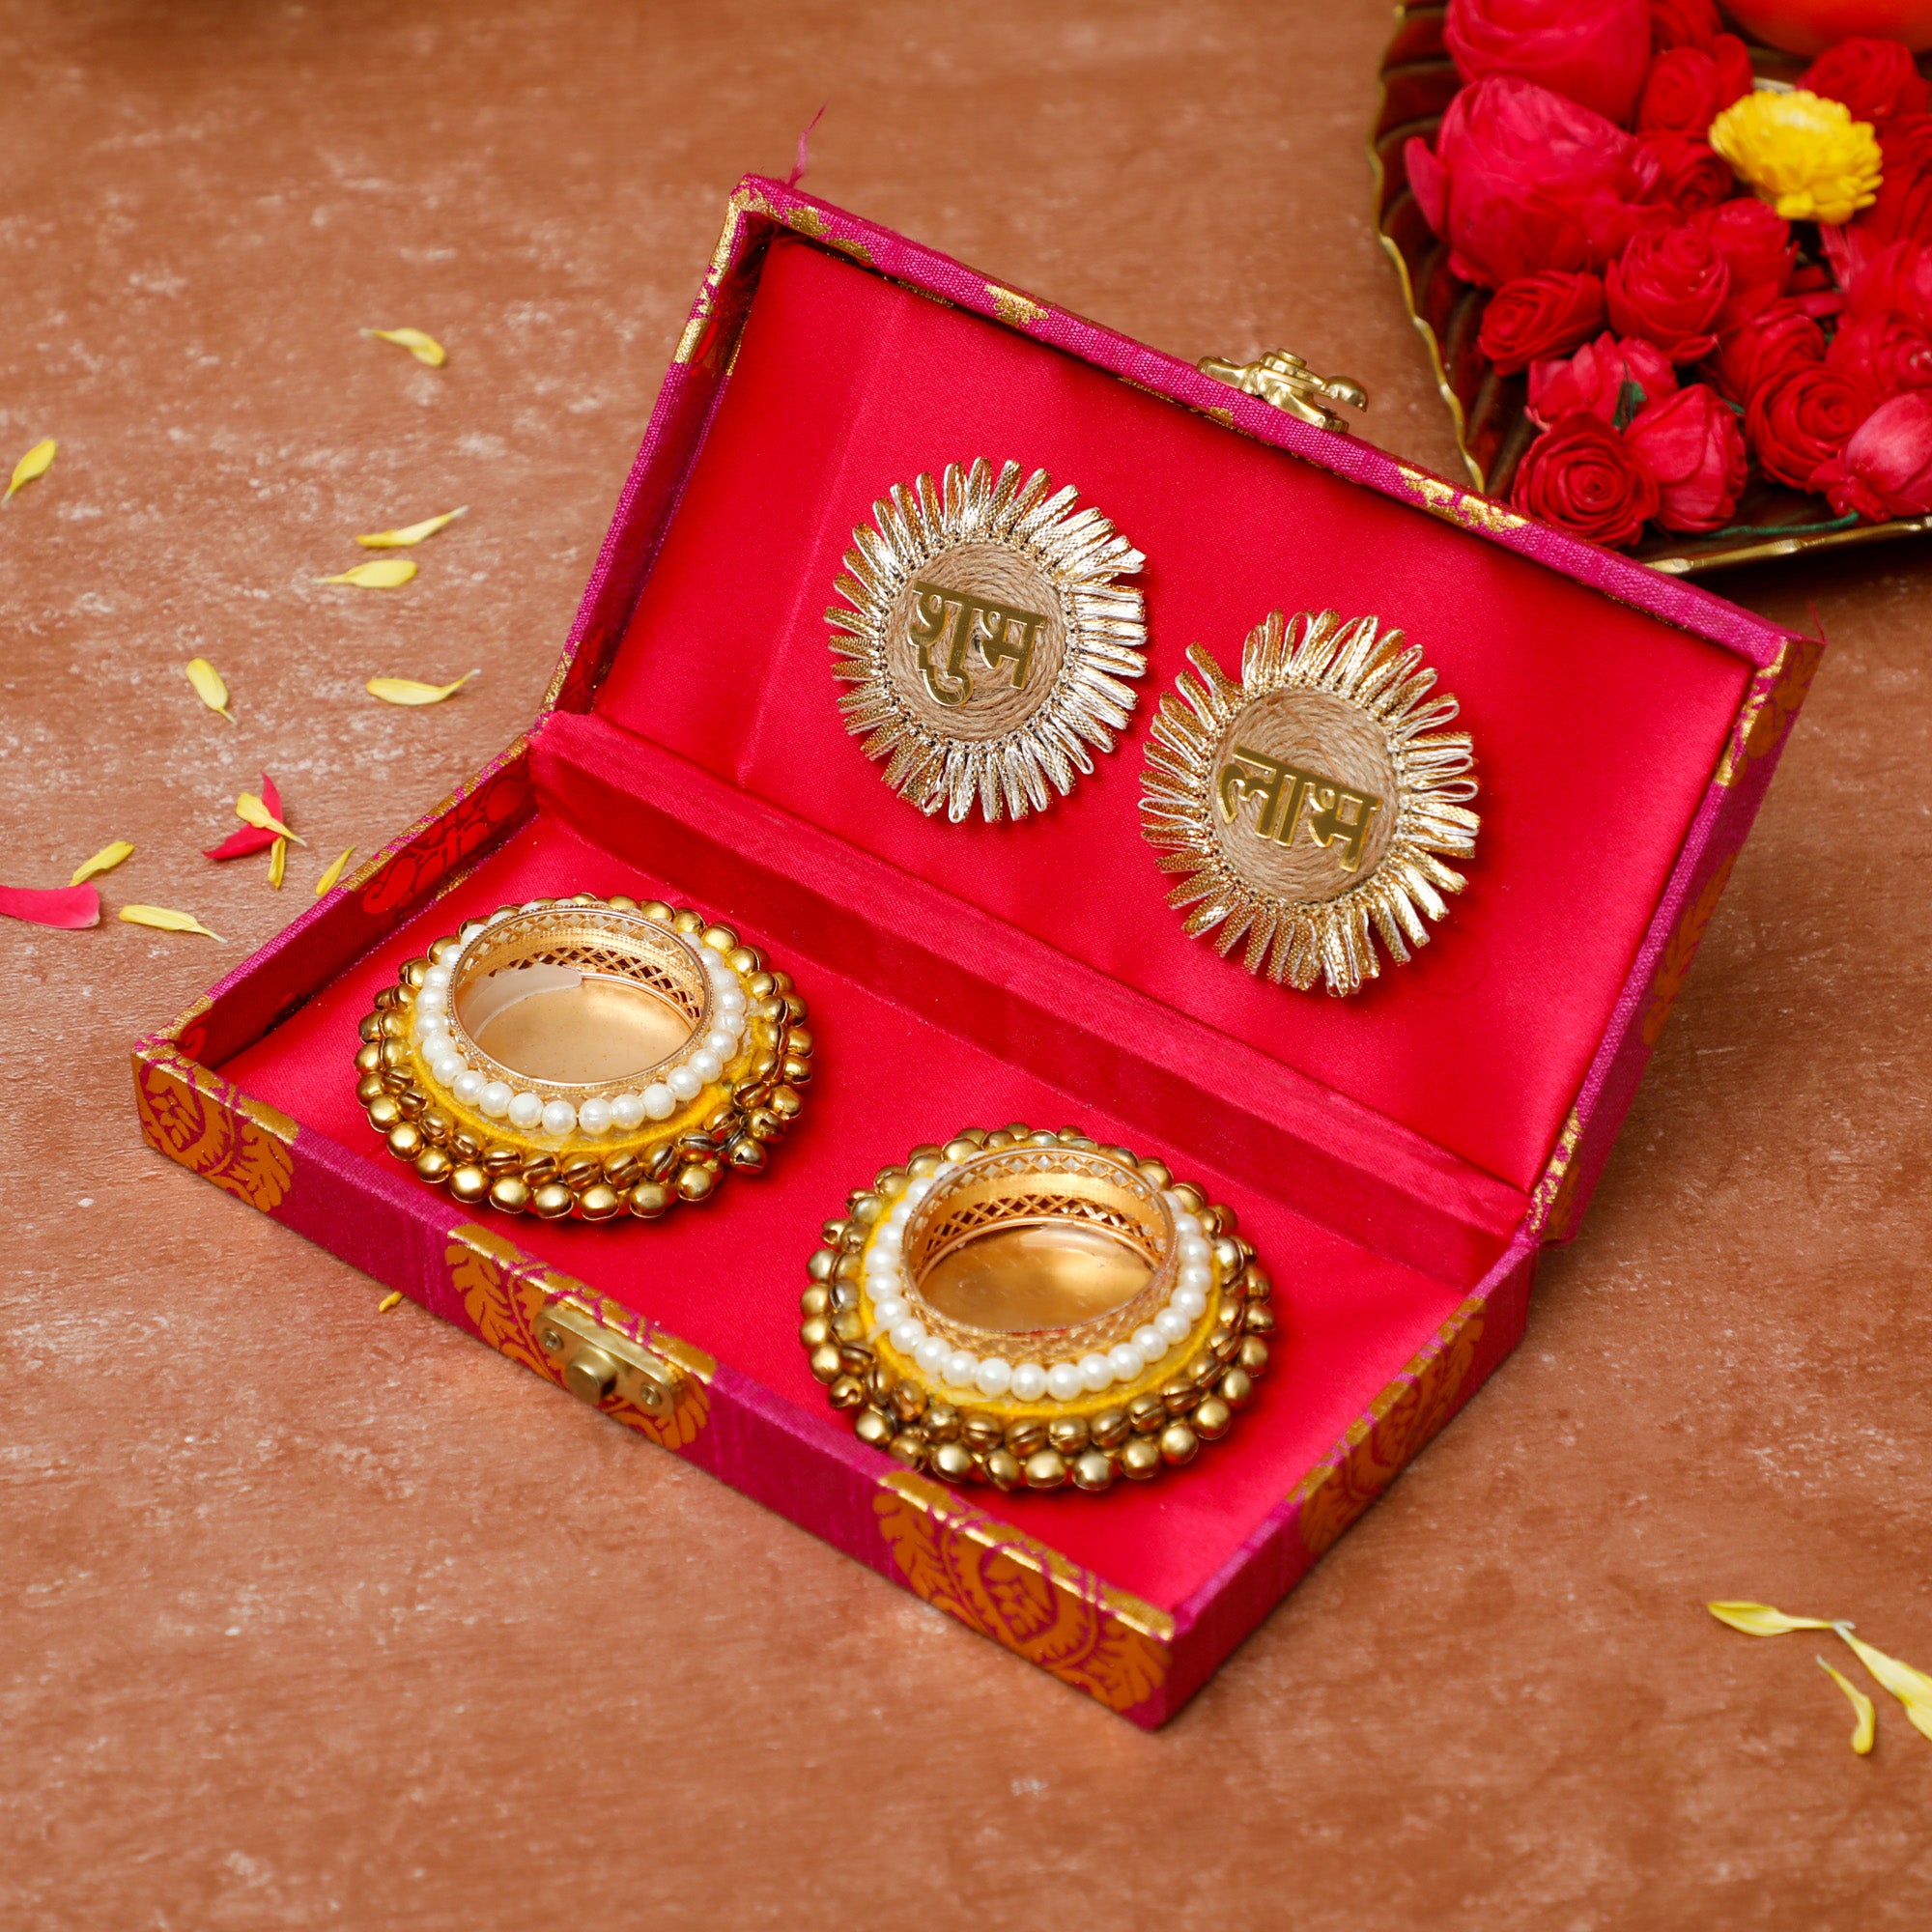 Easy Peasy Favours To Give Away On The Sangeet, To Make The Night More Fun!  | WedMeGood